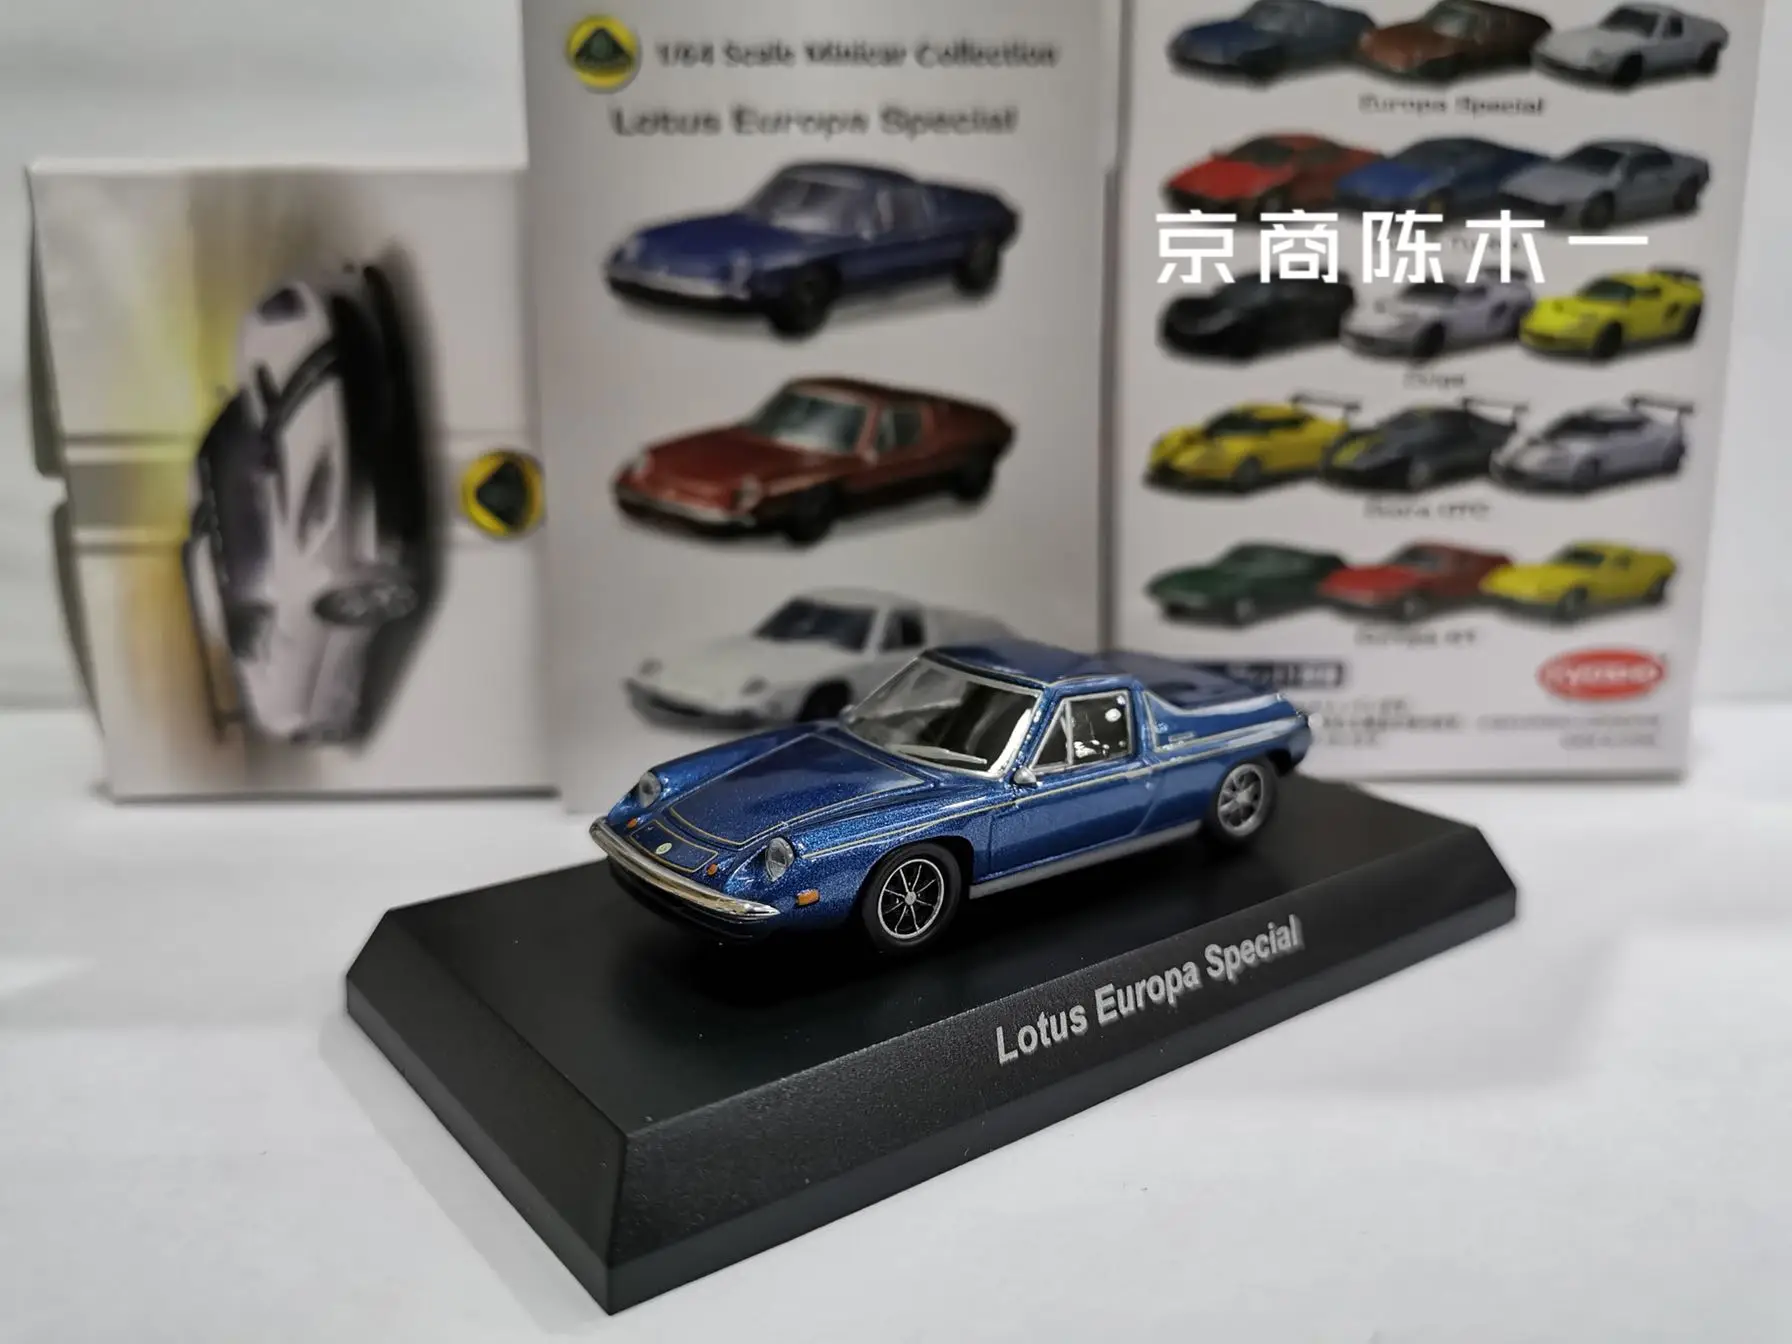 

1/64 KYOSHO Lotus Europa Special Collection of die-cast alloy car decoration model toys